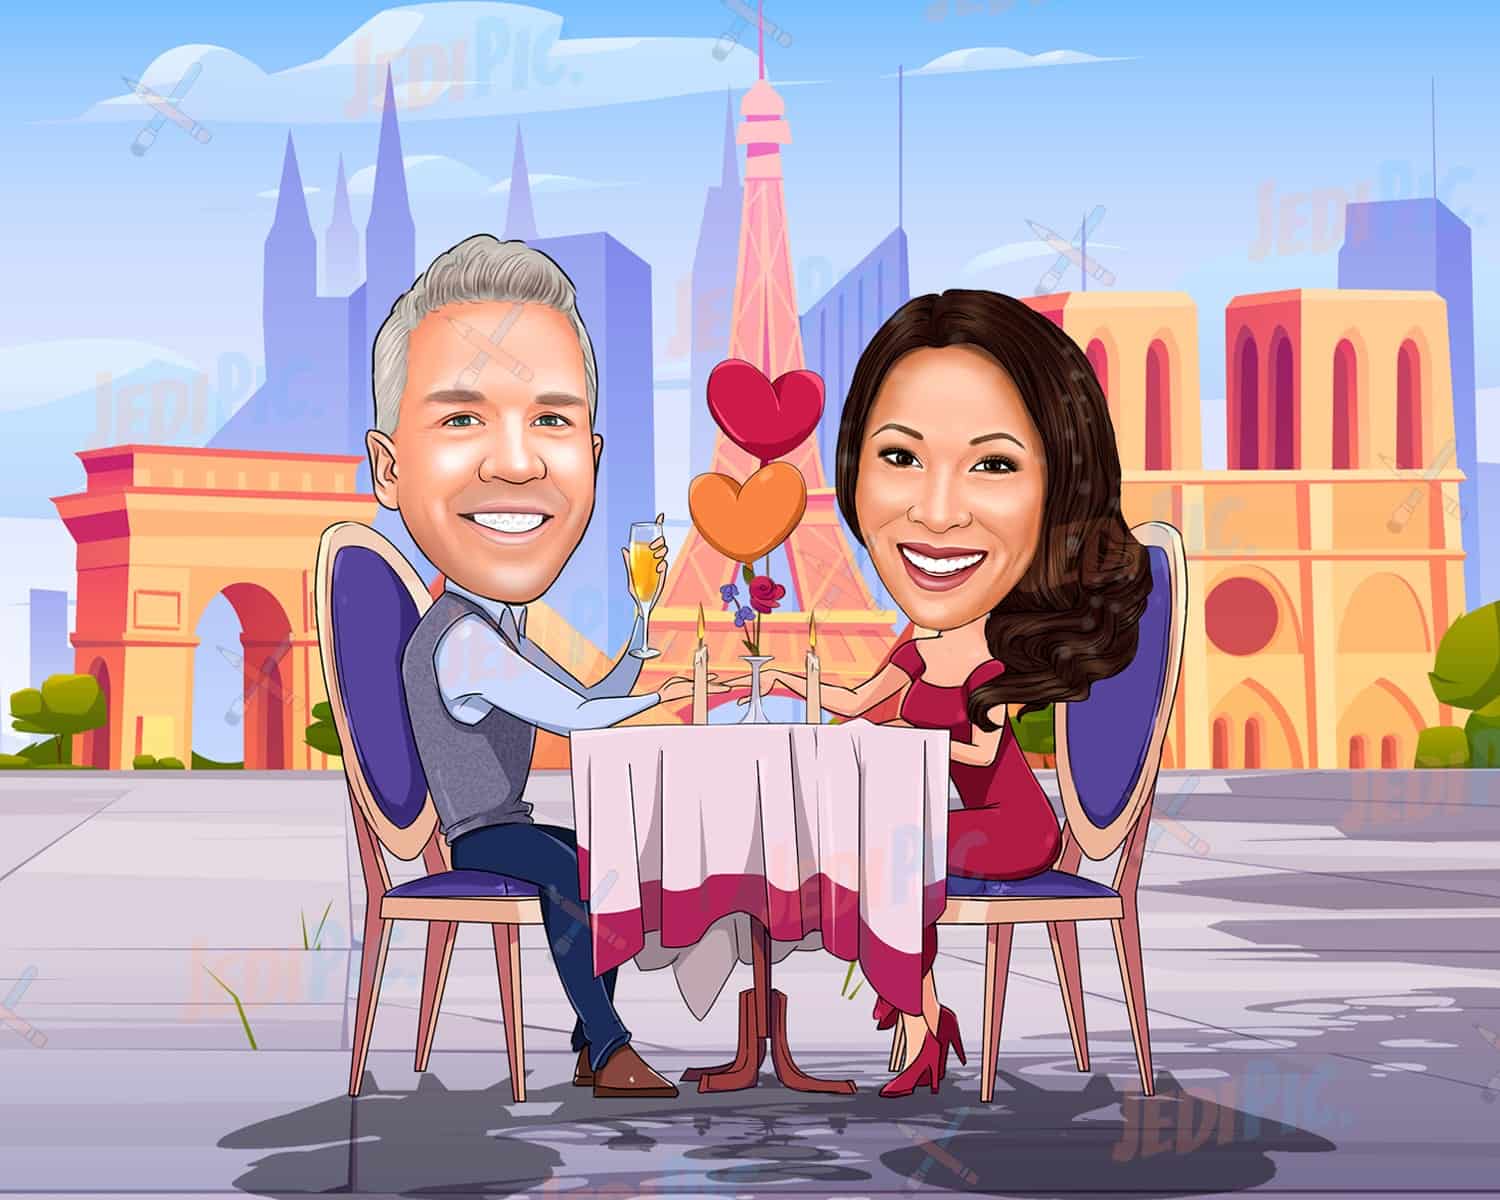 Proposal Caricature on Romantic Background